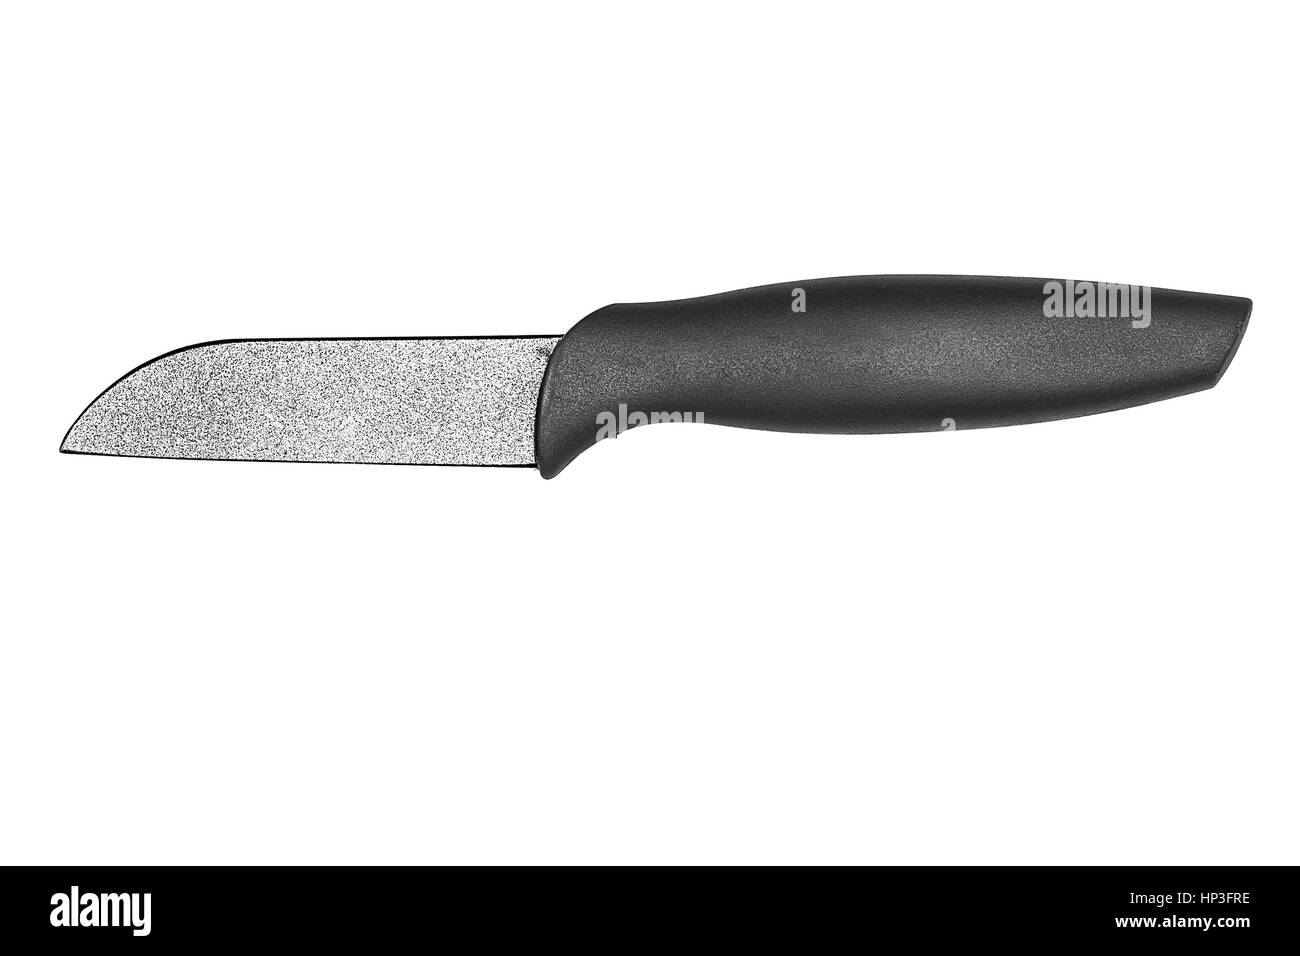 large kitchen knife with a plastic handle on white background Stock Photo